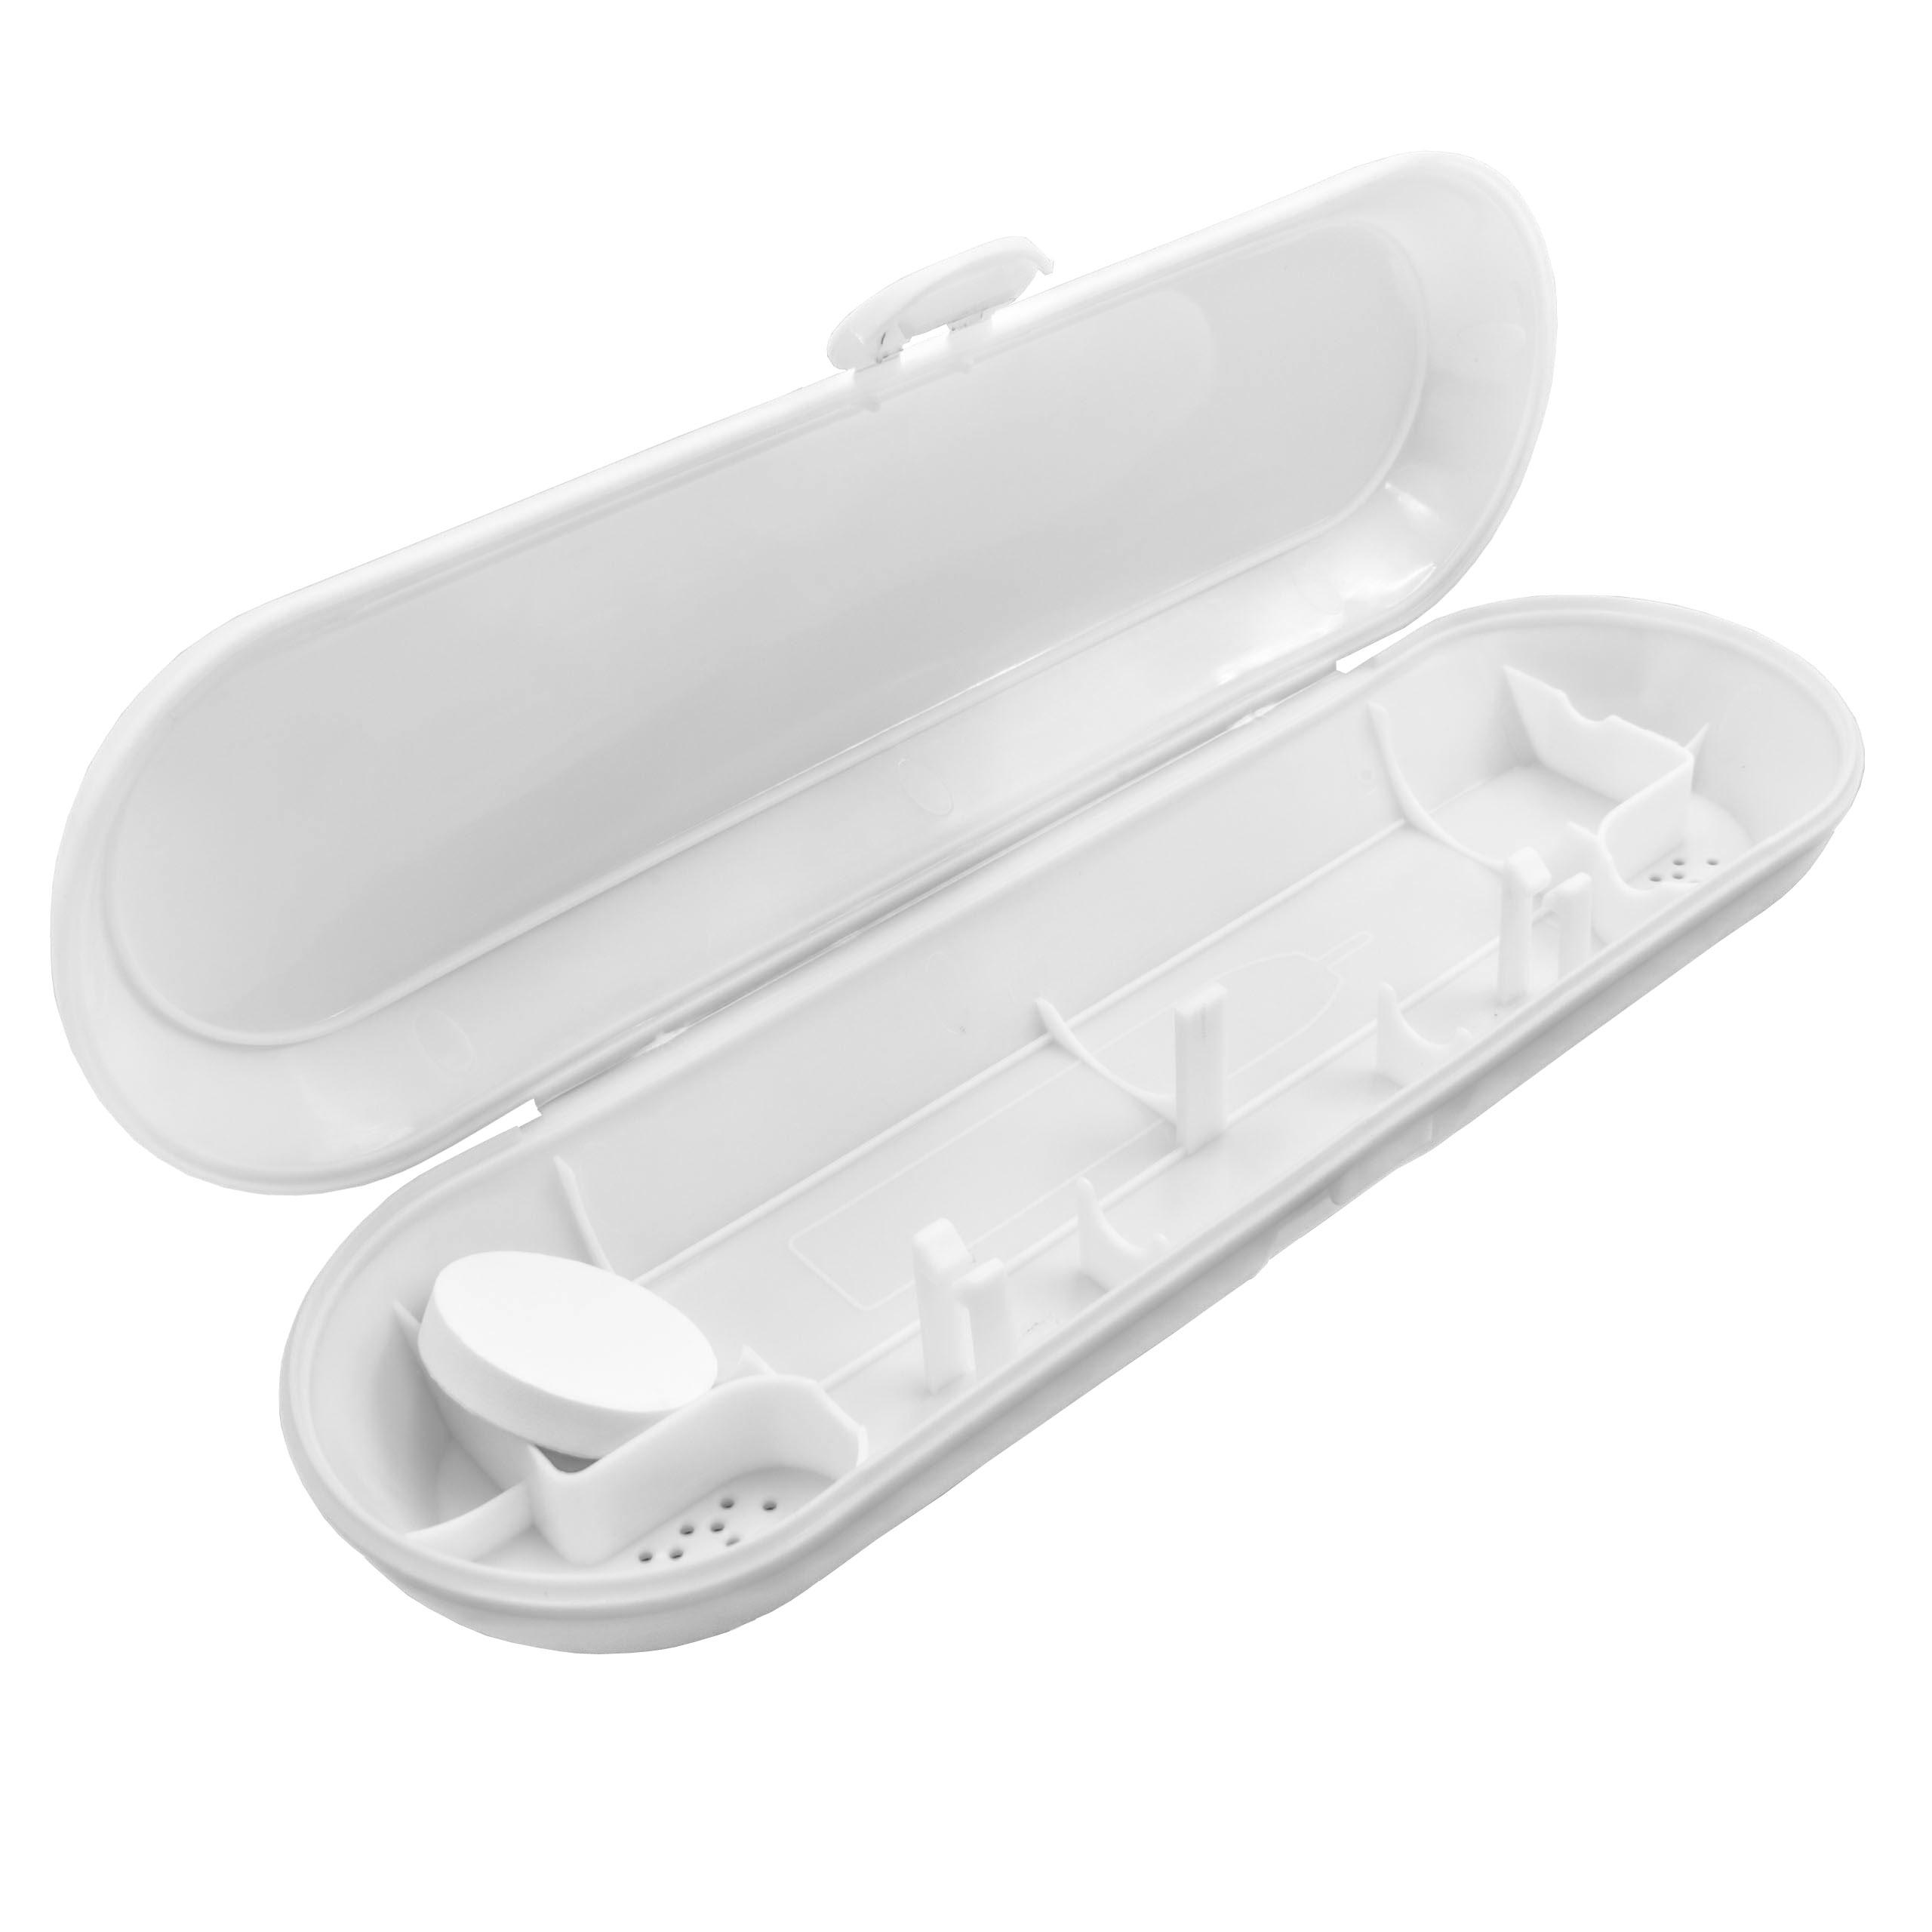 vhbw Toothbrush Holder compatible with Various Electric Toothbrushes - Protective Storage Case, white